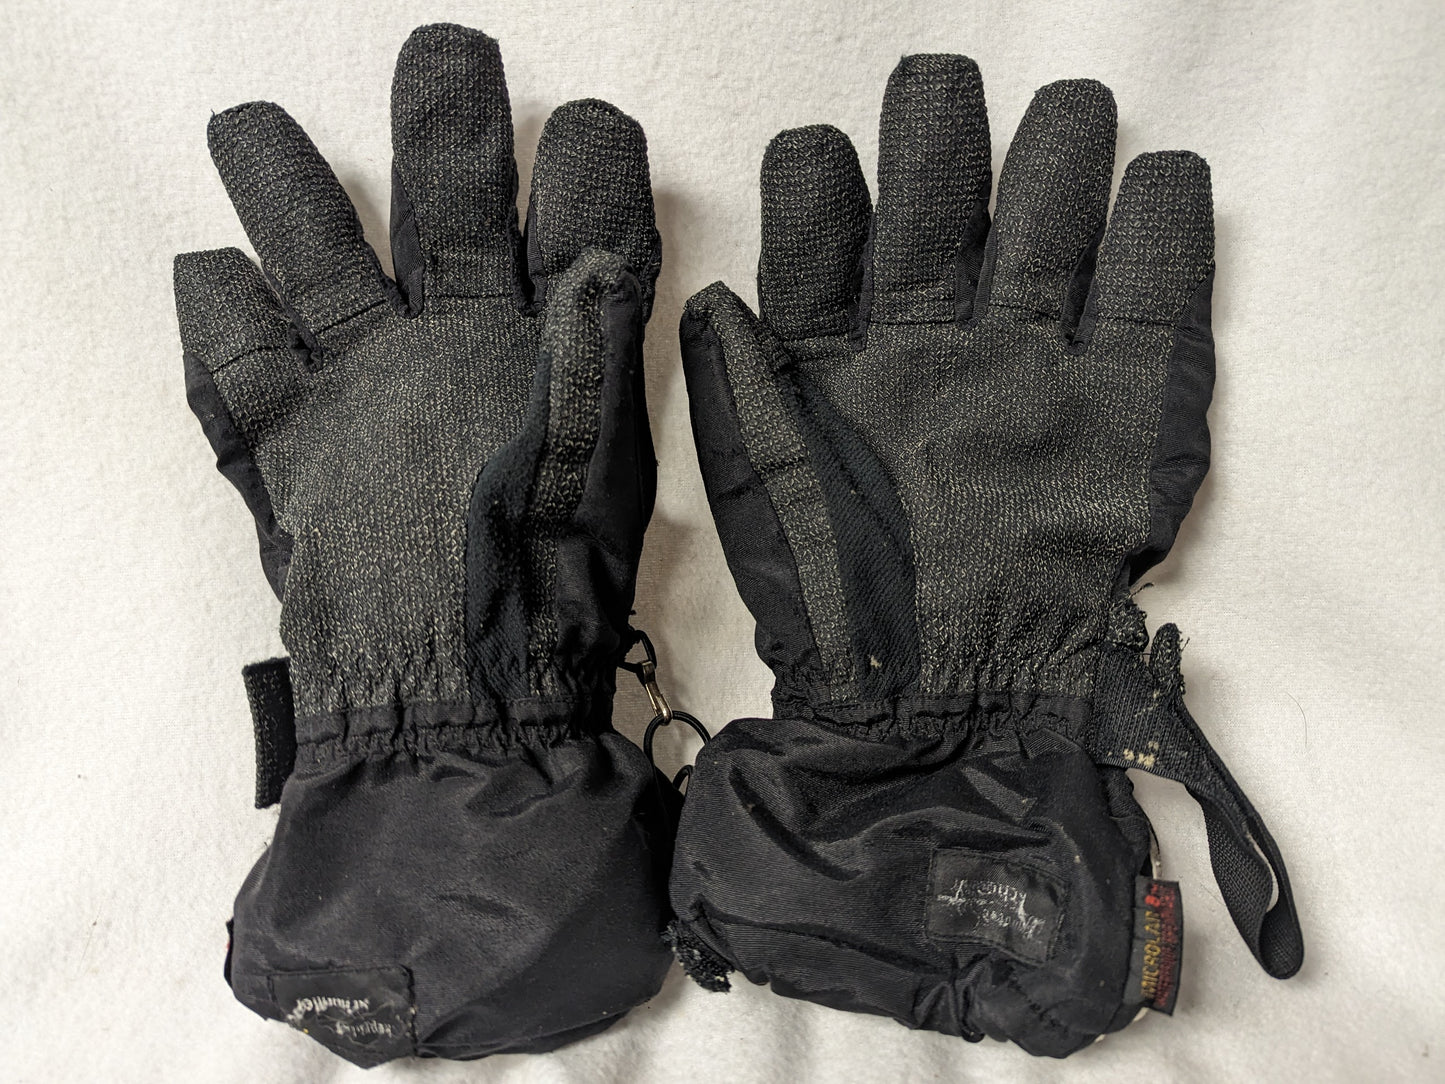 Schoeller Insulated Gloves Size Large Color Black Condition Used